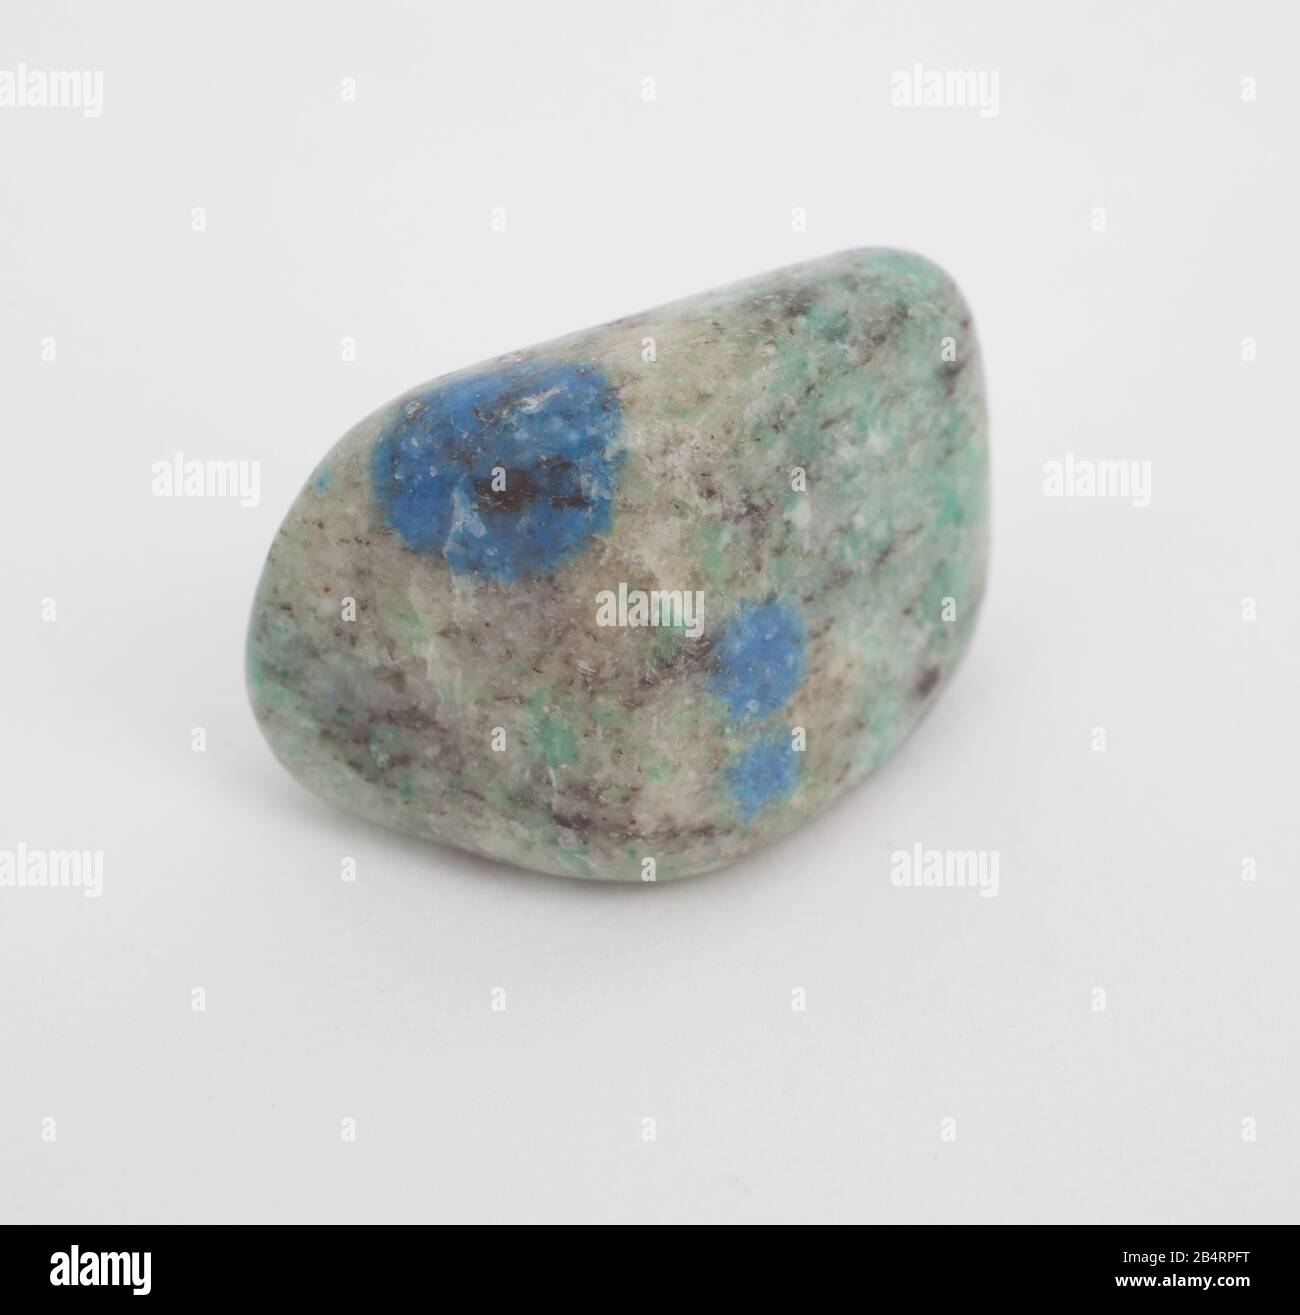 A blue grey gemstone photographed against a white background Stock Photo